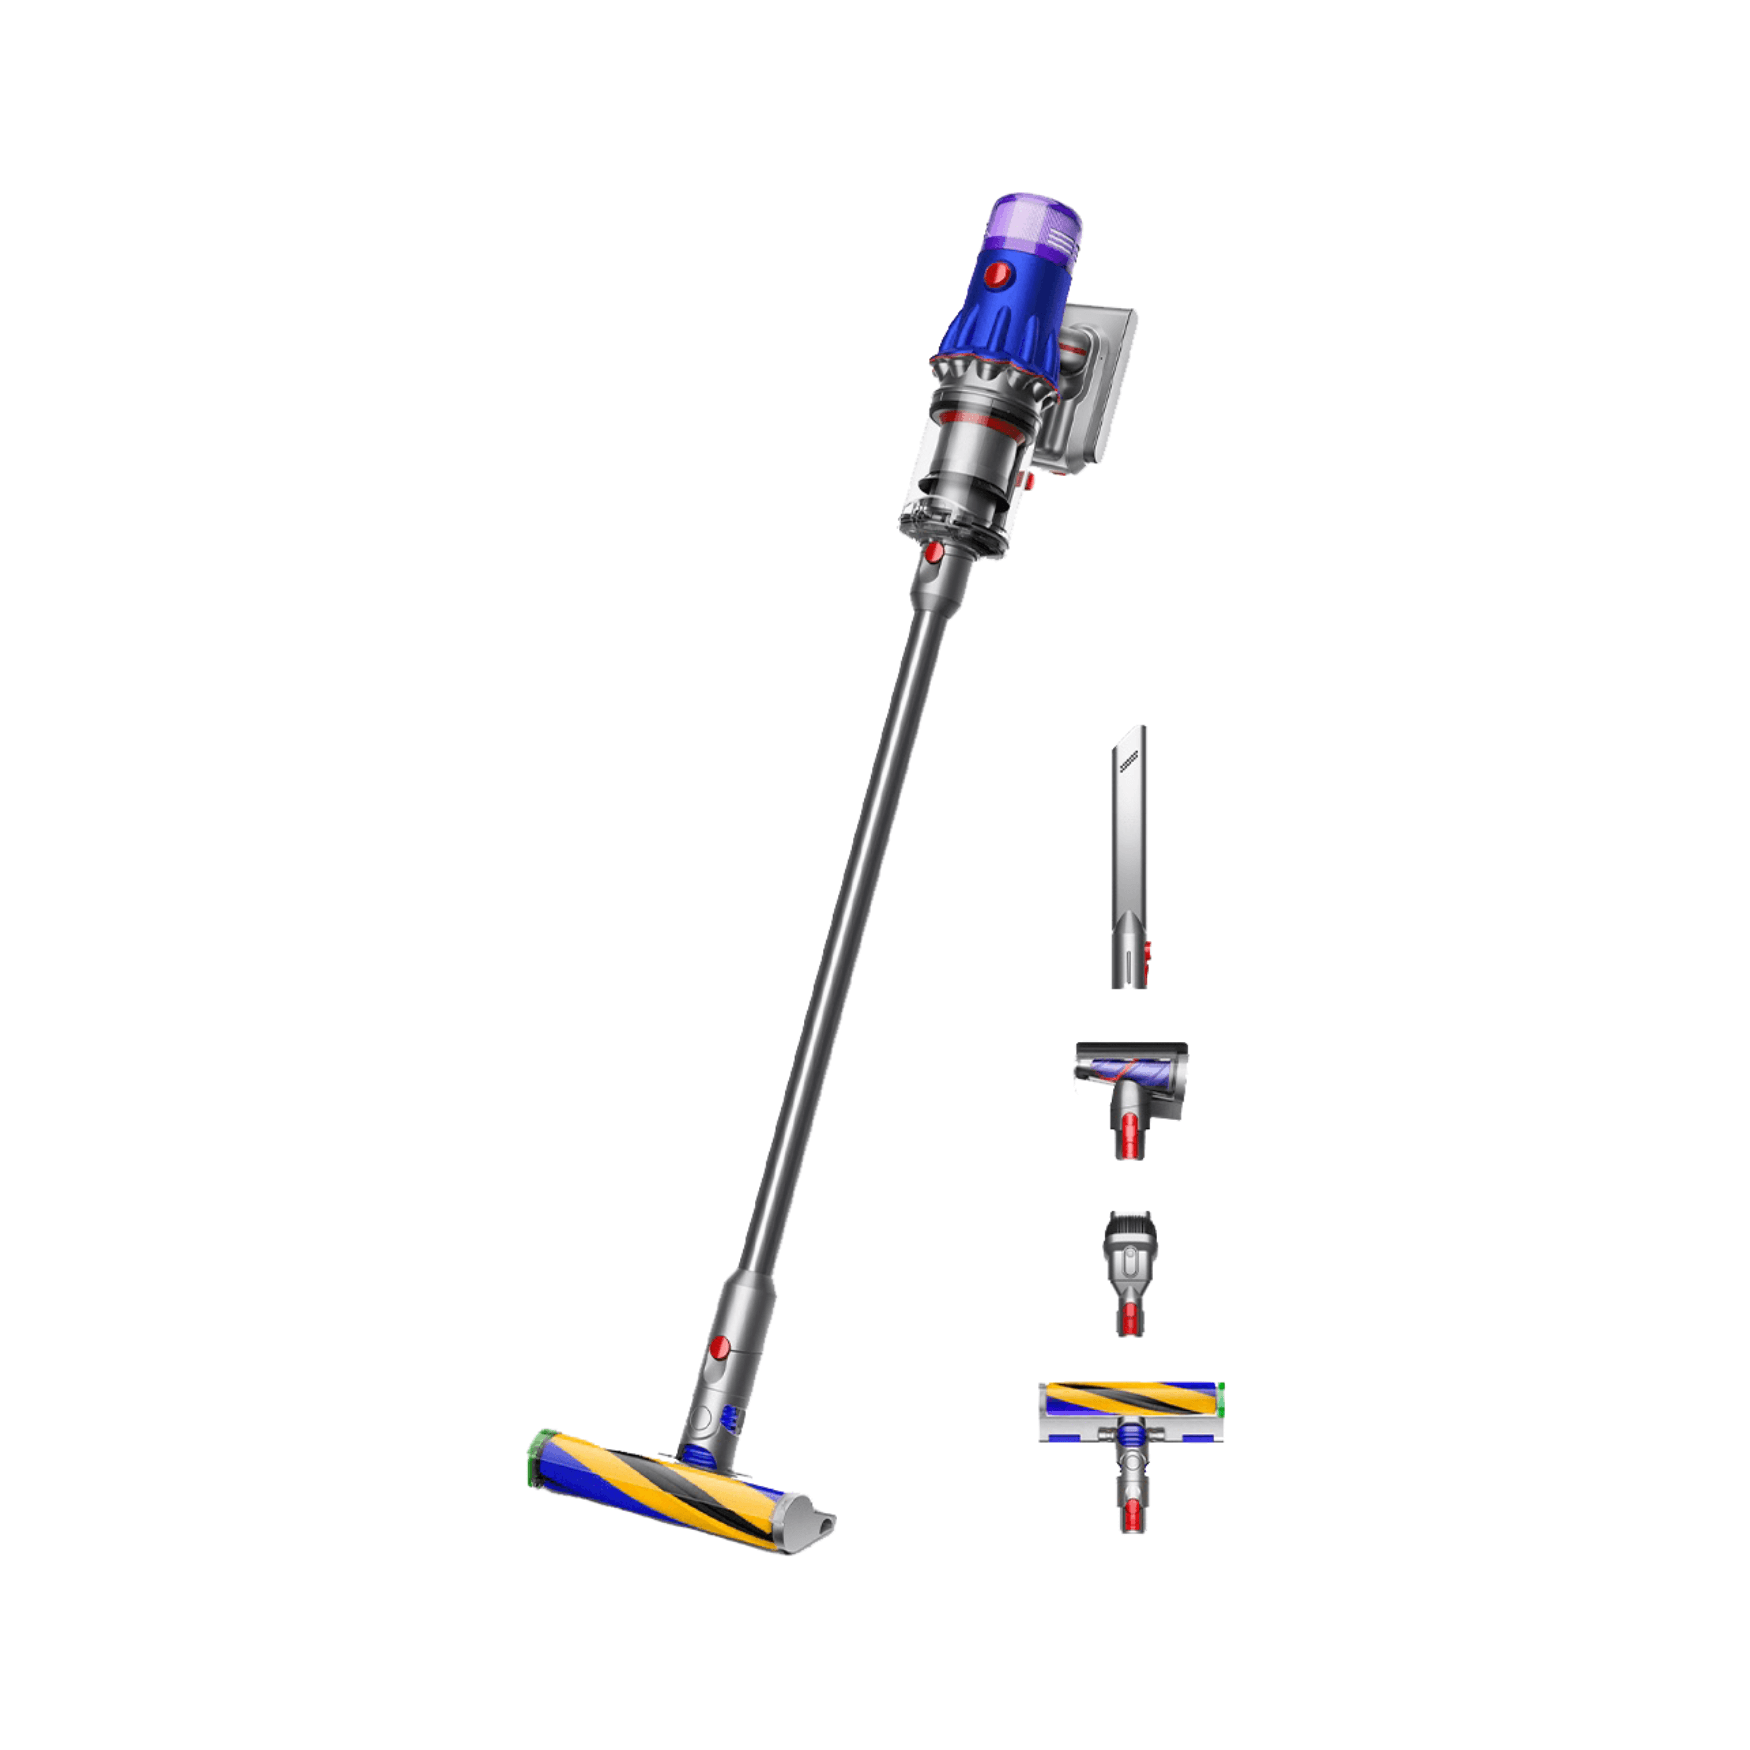 Dyson V12 Detect Slim Fluffy SV20 Cordless Vacuum Cleaner | 150AW Suction | 2 Years Warranty